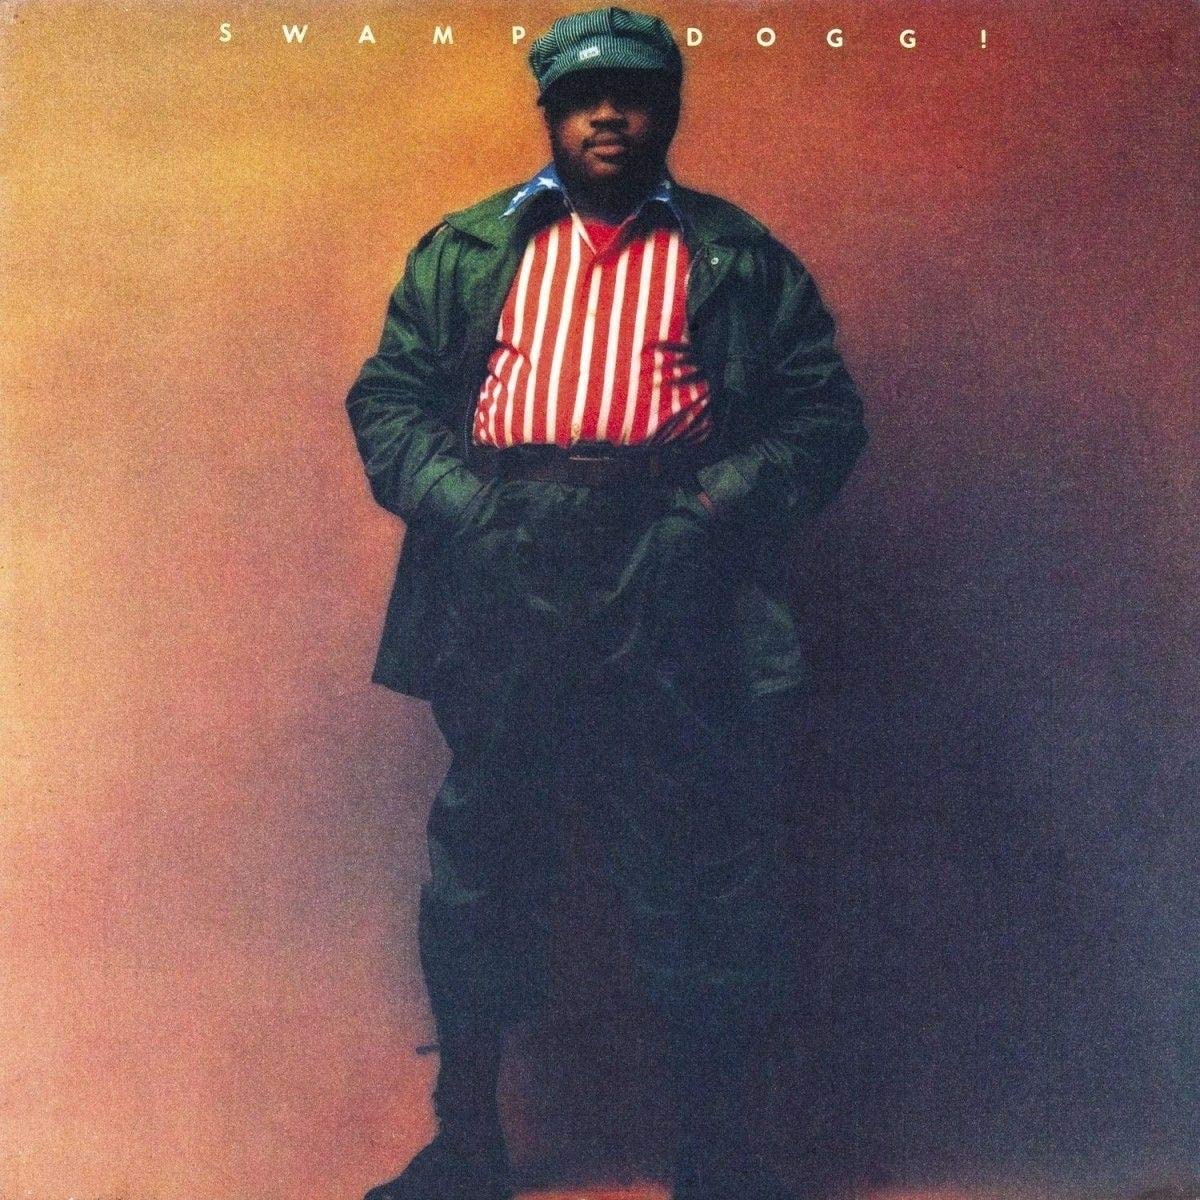 Swamp Dogg - Cuffed, Collared And Tagged - CD